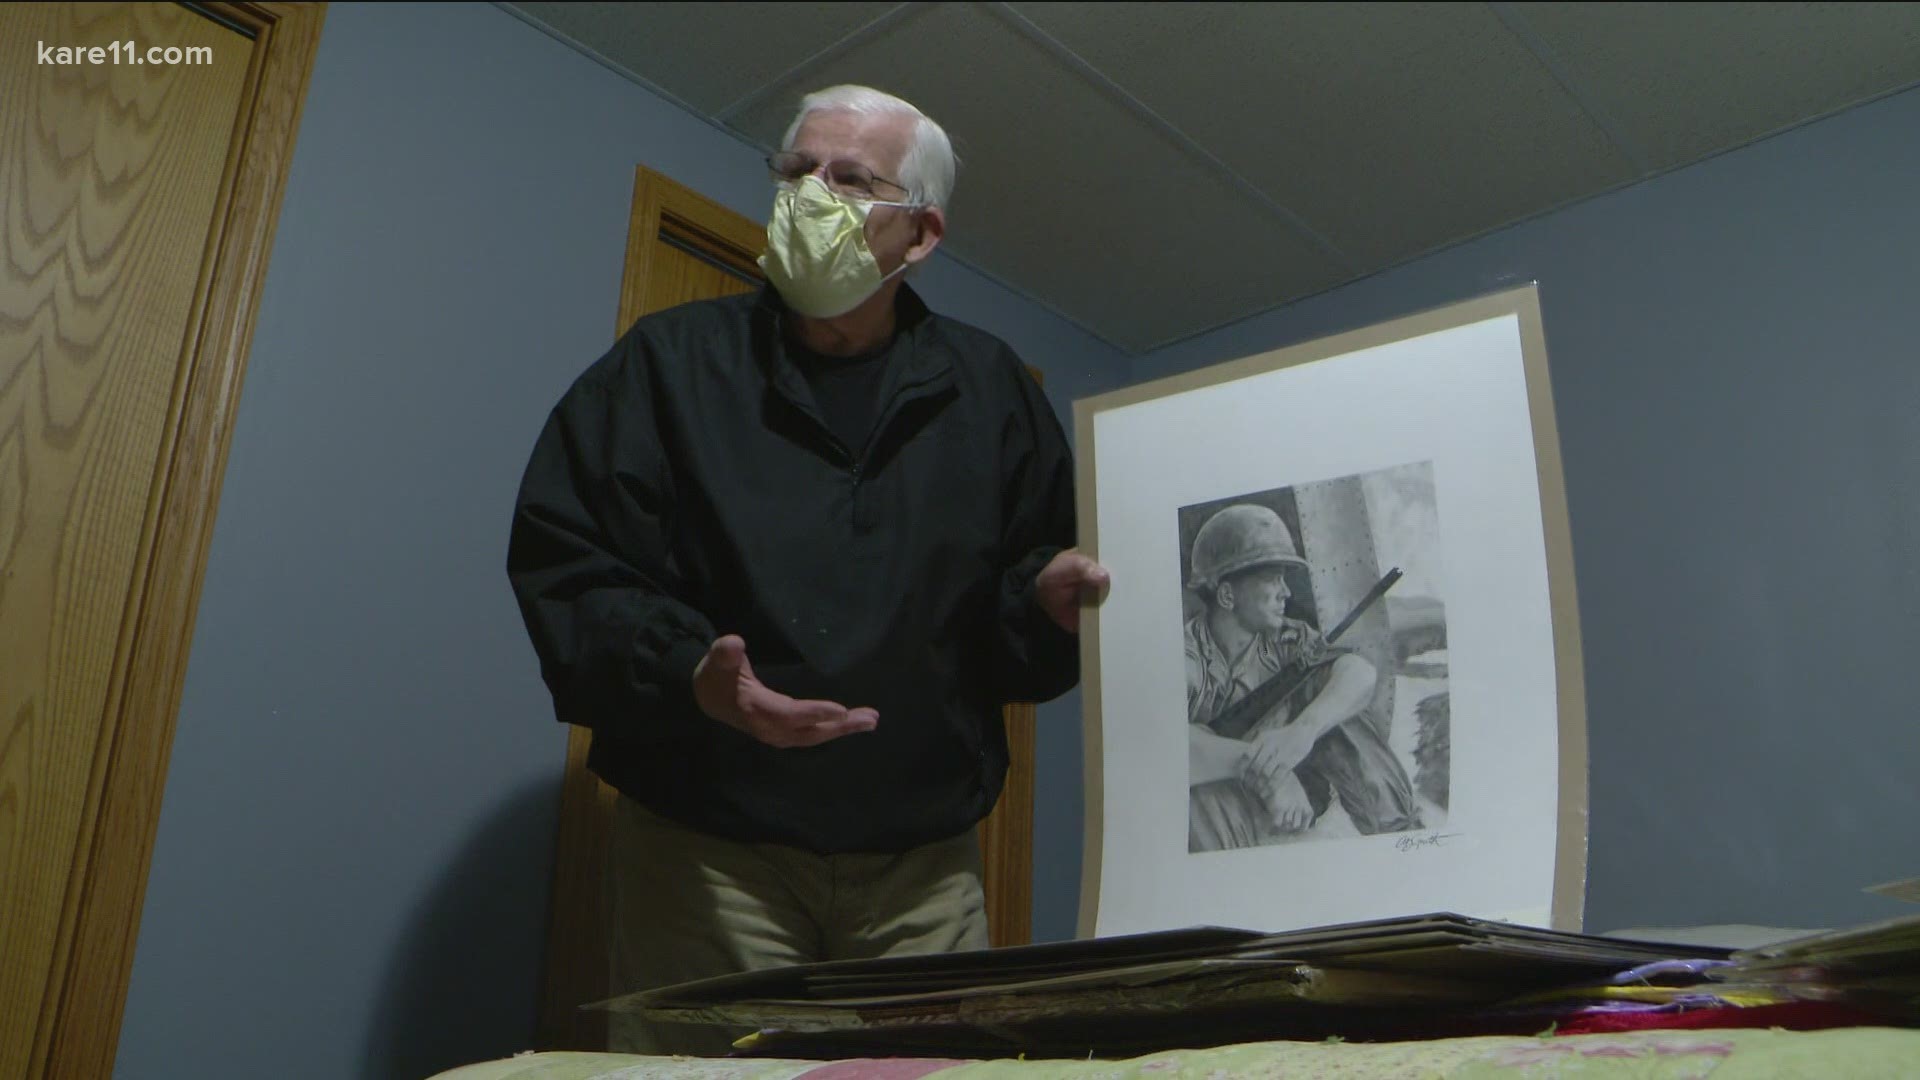 Al Smith has been an artist his entire life, but has only started doing pencil sketches two years ago.